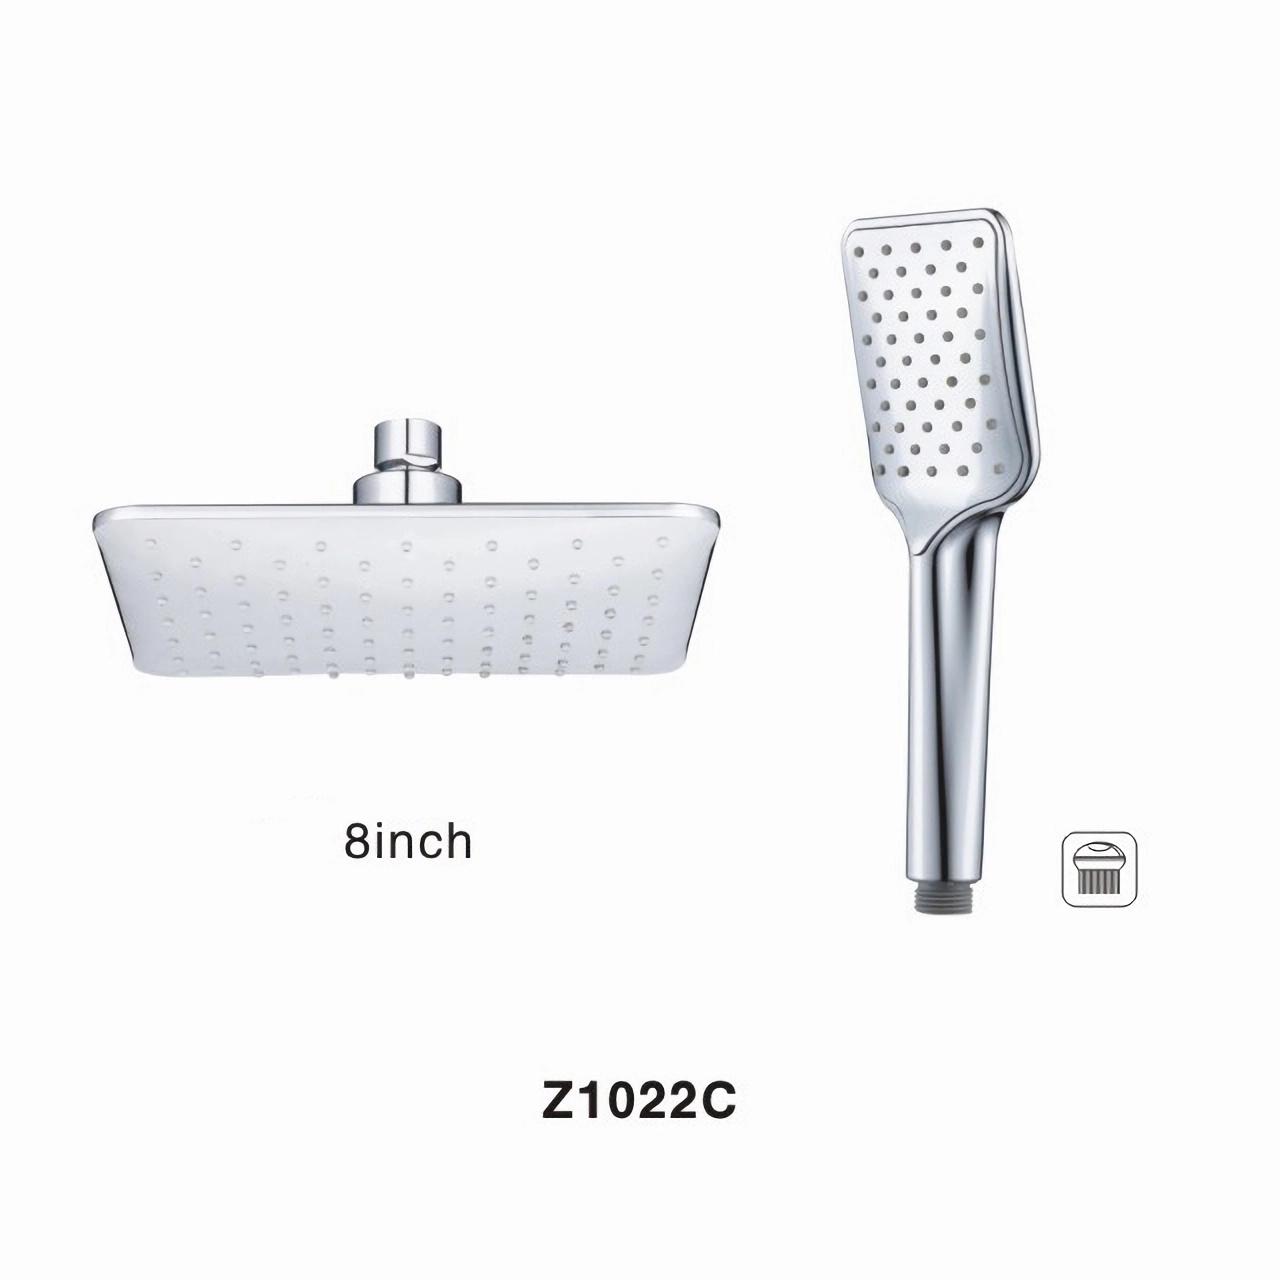 Z1022C 8 Inch Rainfall Square High Pressure Shower Head Brass Swivel Ball And Polished Chrome Finish with Handheld One Function Plastic Hand Shower